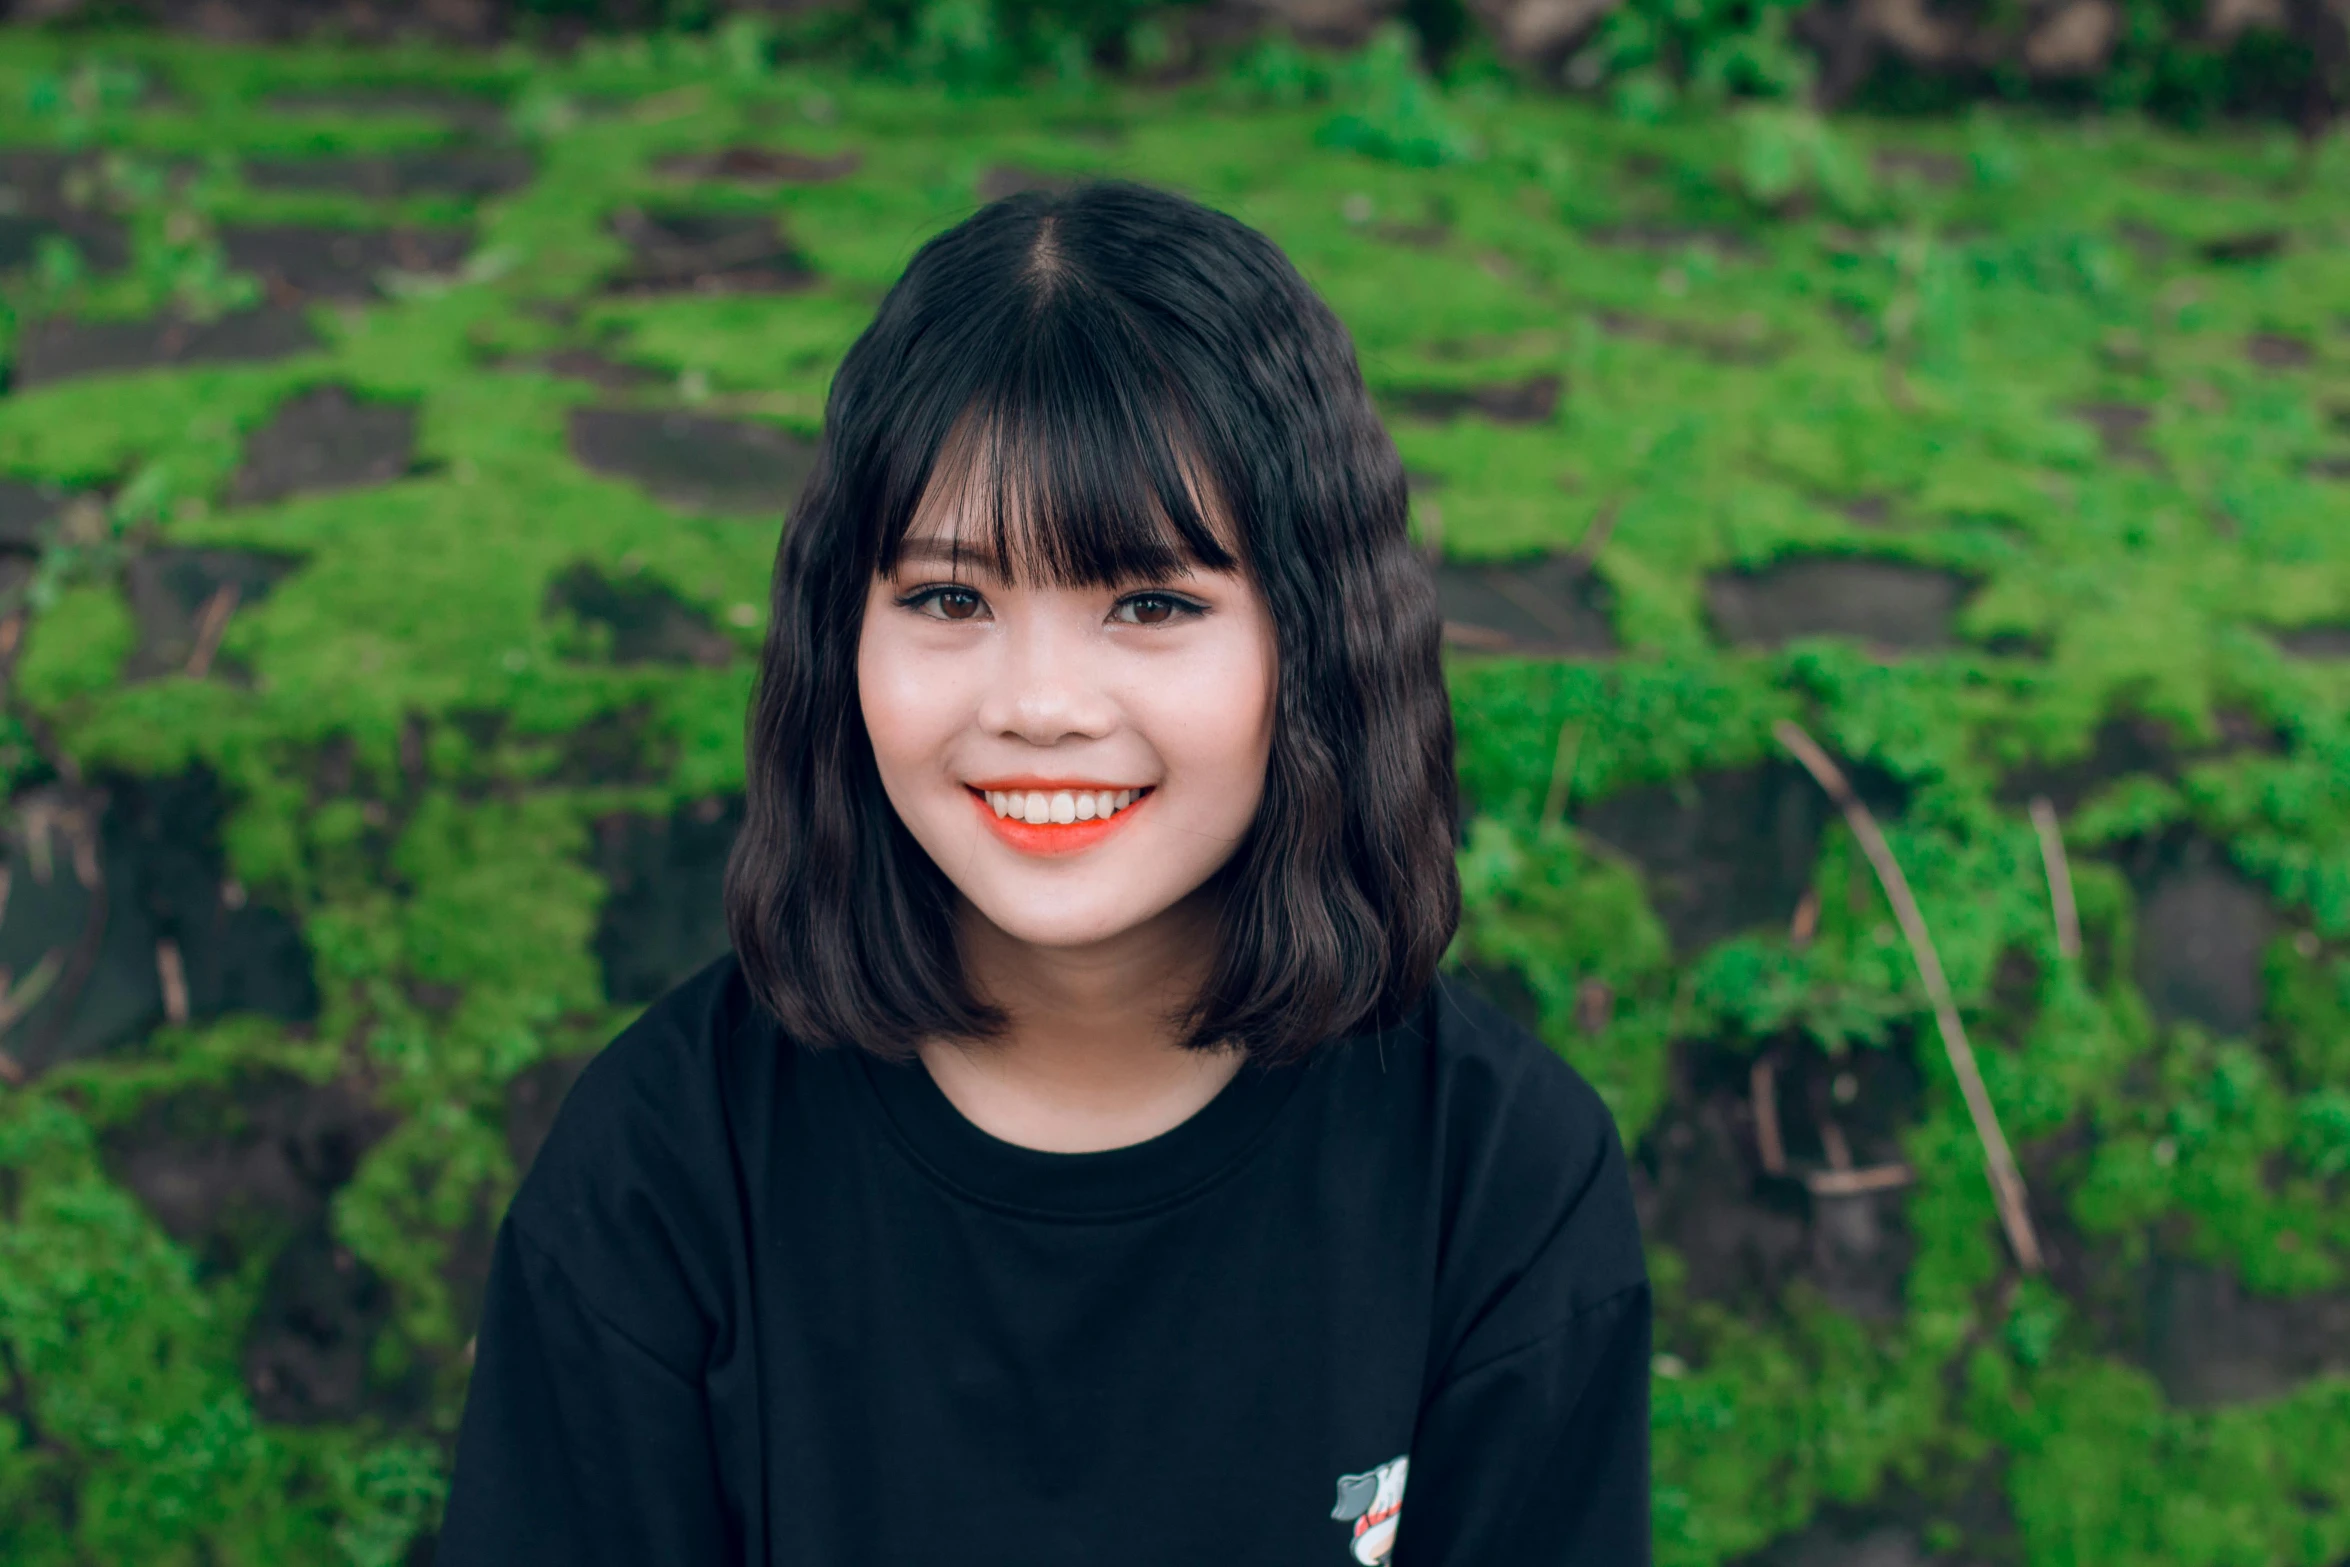 a woman standing in front of a lush green field, a picture, inspired by Ruth Jên, pexels contest winner, realism, black bangs, coral brown hair, young cute wan asian face, 1 6 years old